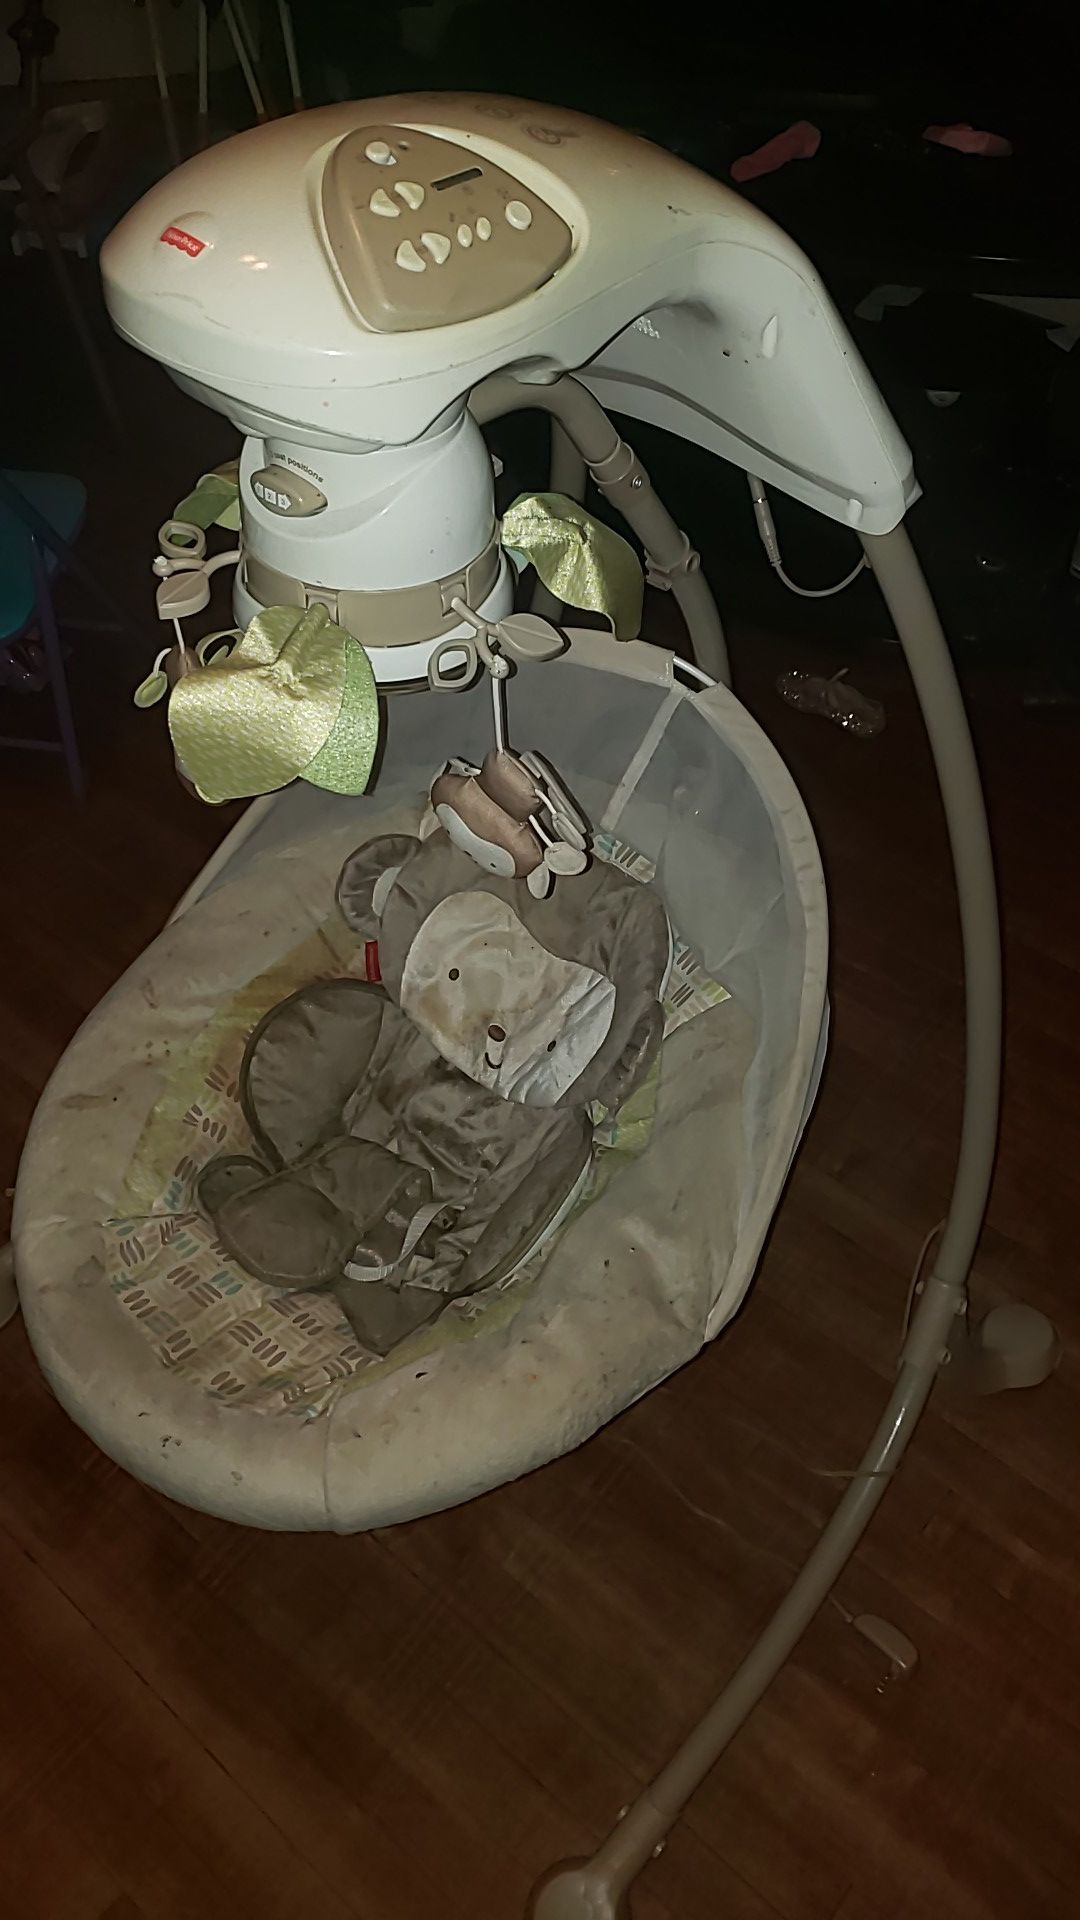 Automatic swing for baby asking $35